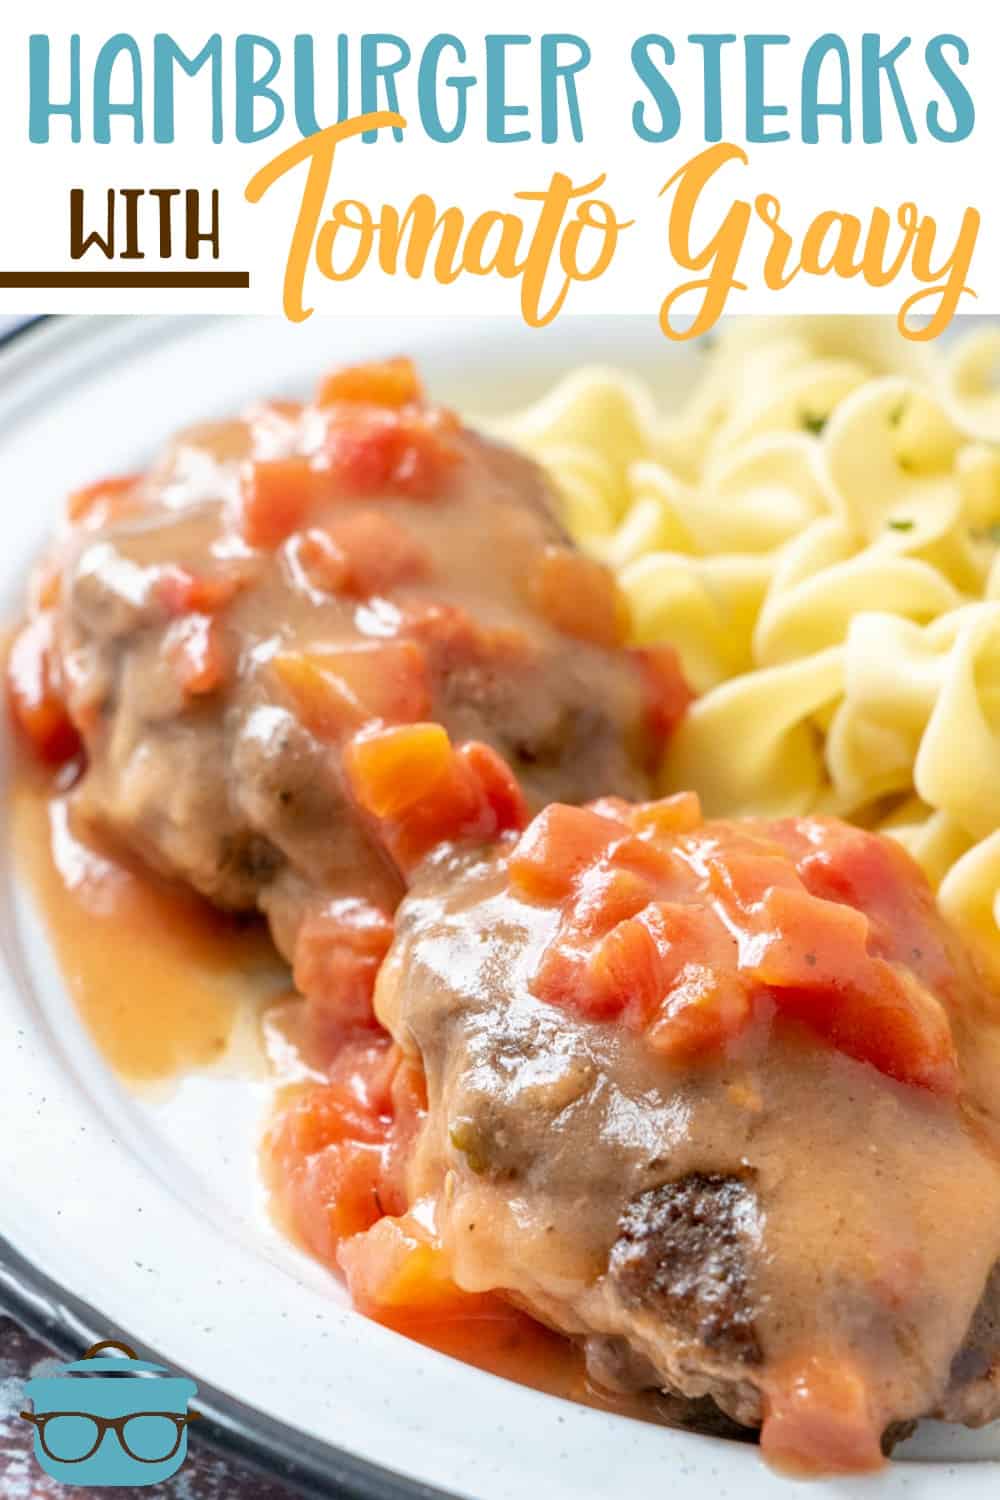 Hamburger Steaks with Tomato Gravy recipe from The Country Cook shown on a white plate with egg noodles.